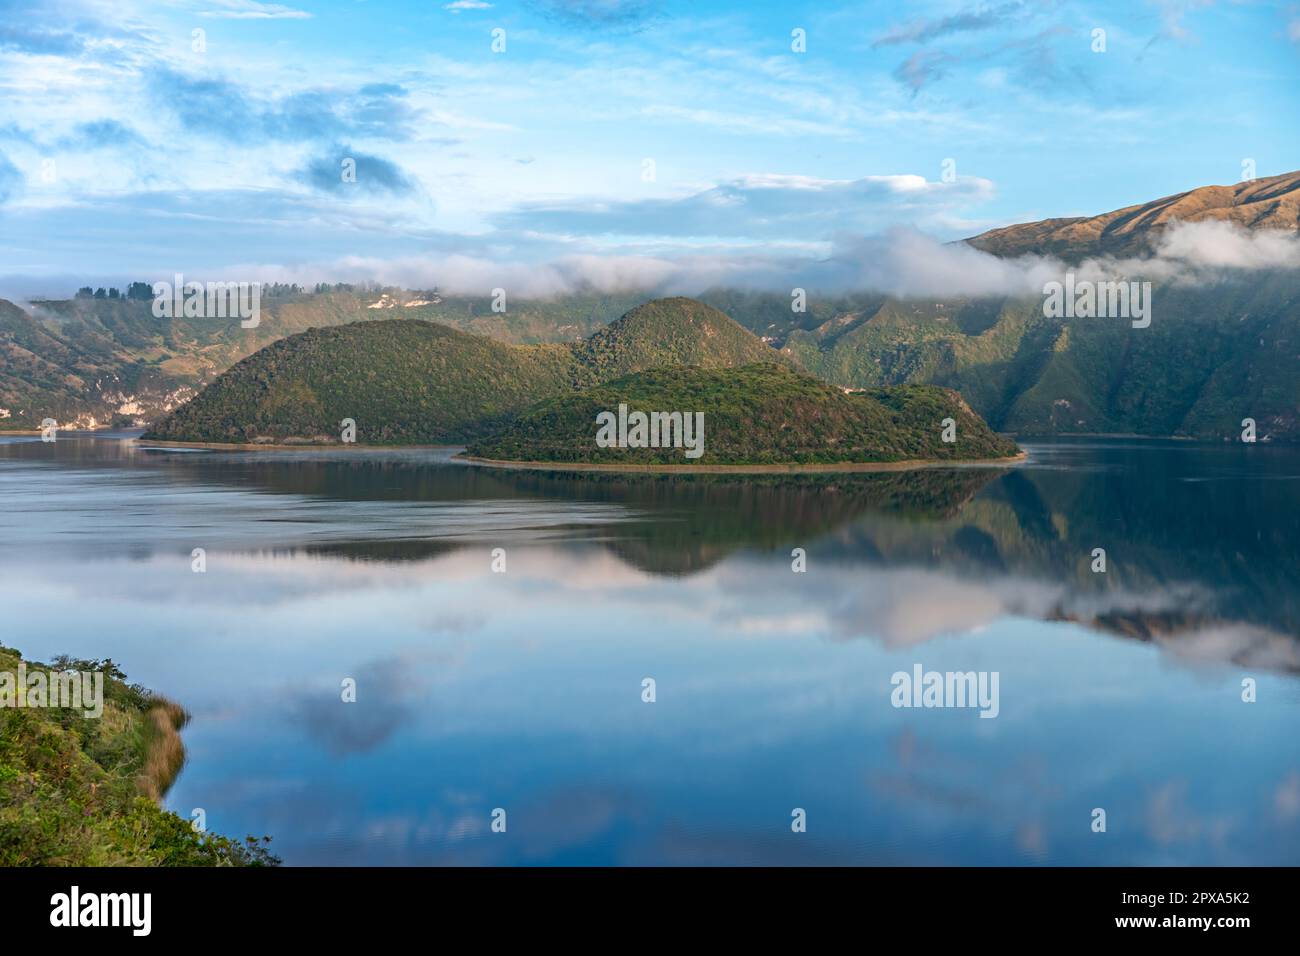 Cuicocha crater lake at the foot of Cotacachi Volcano in the Ecuadorian ...